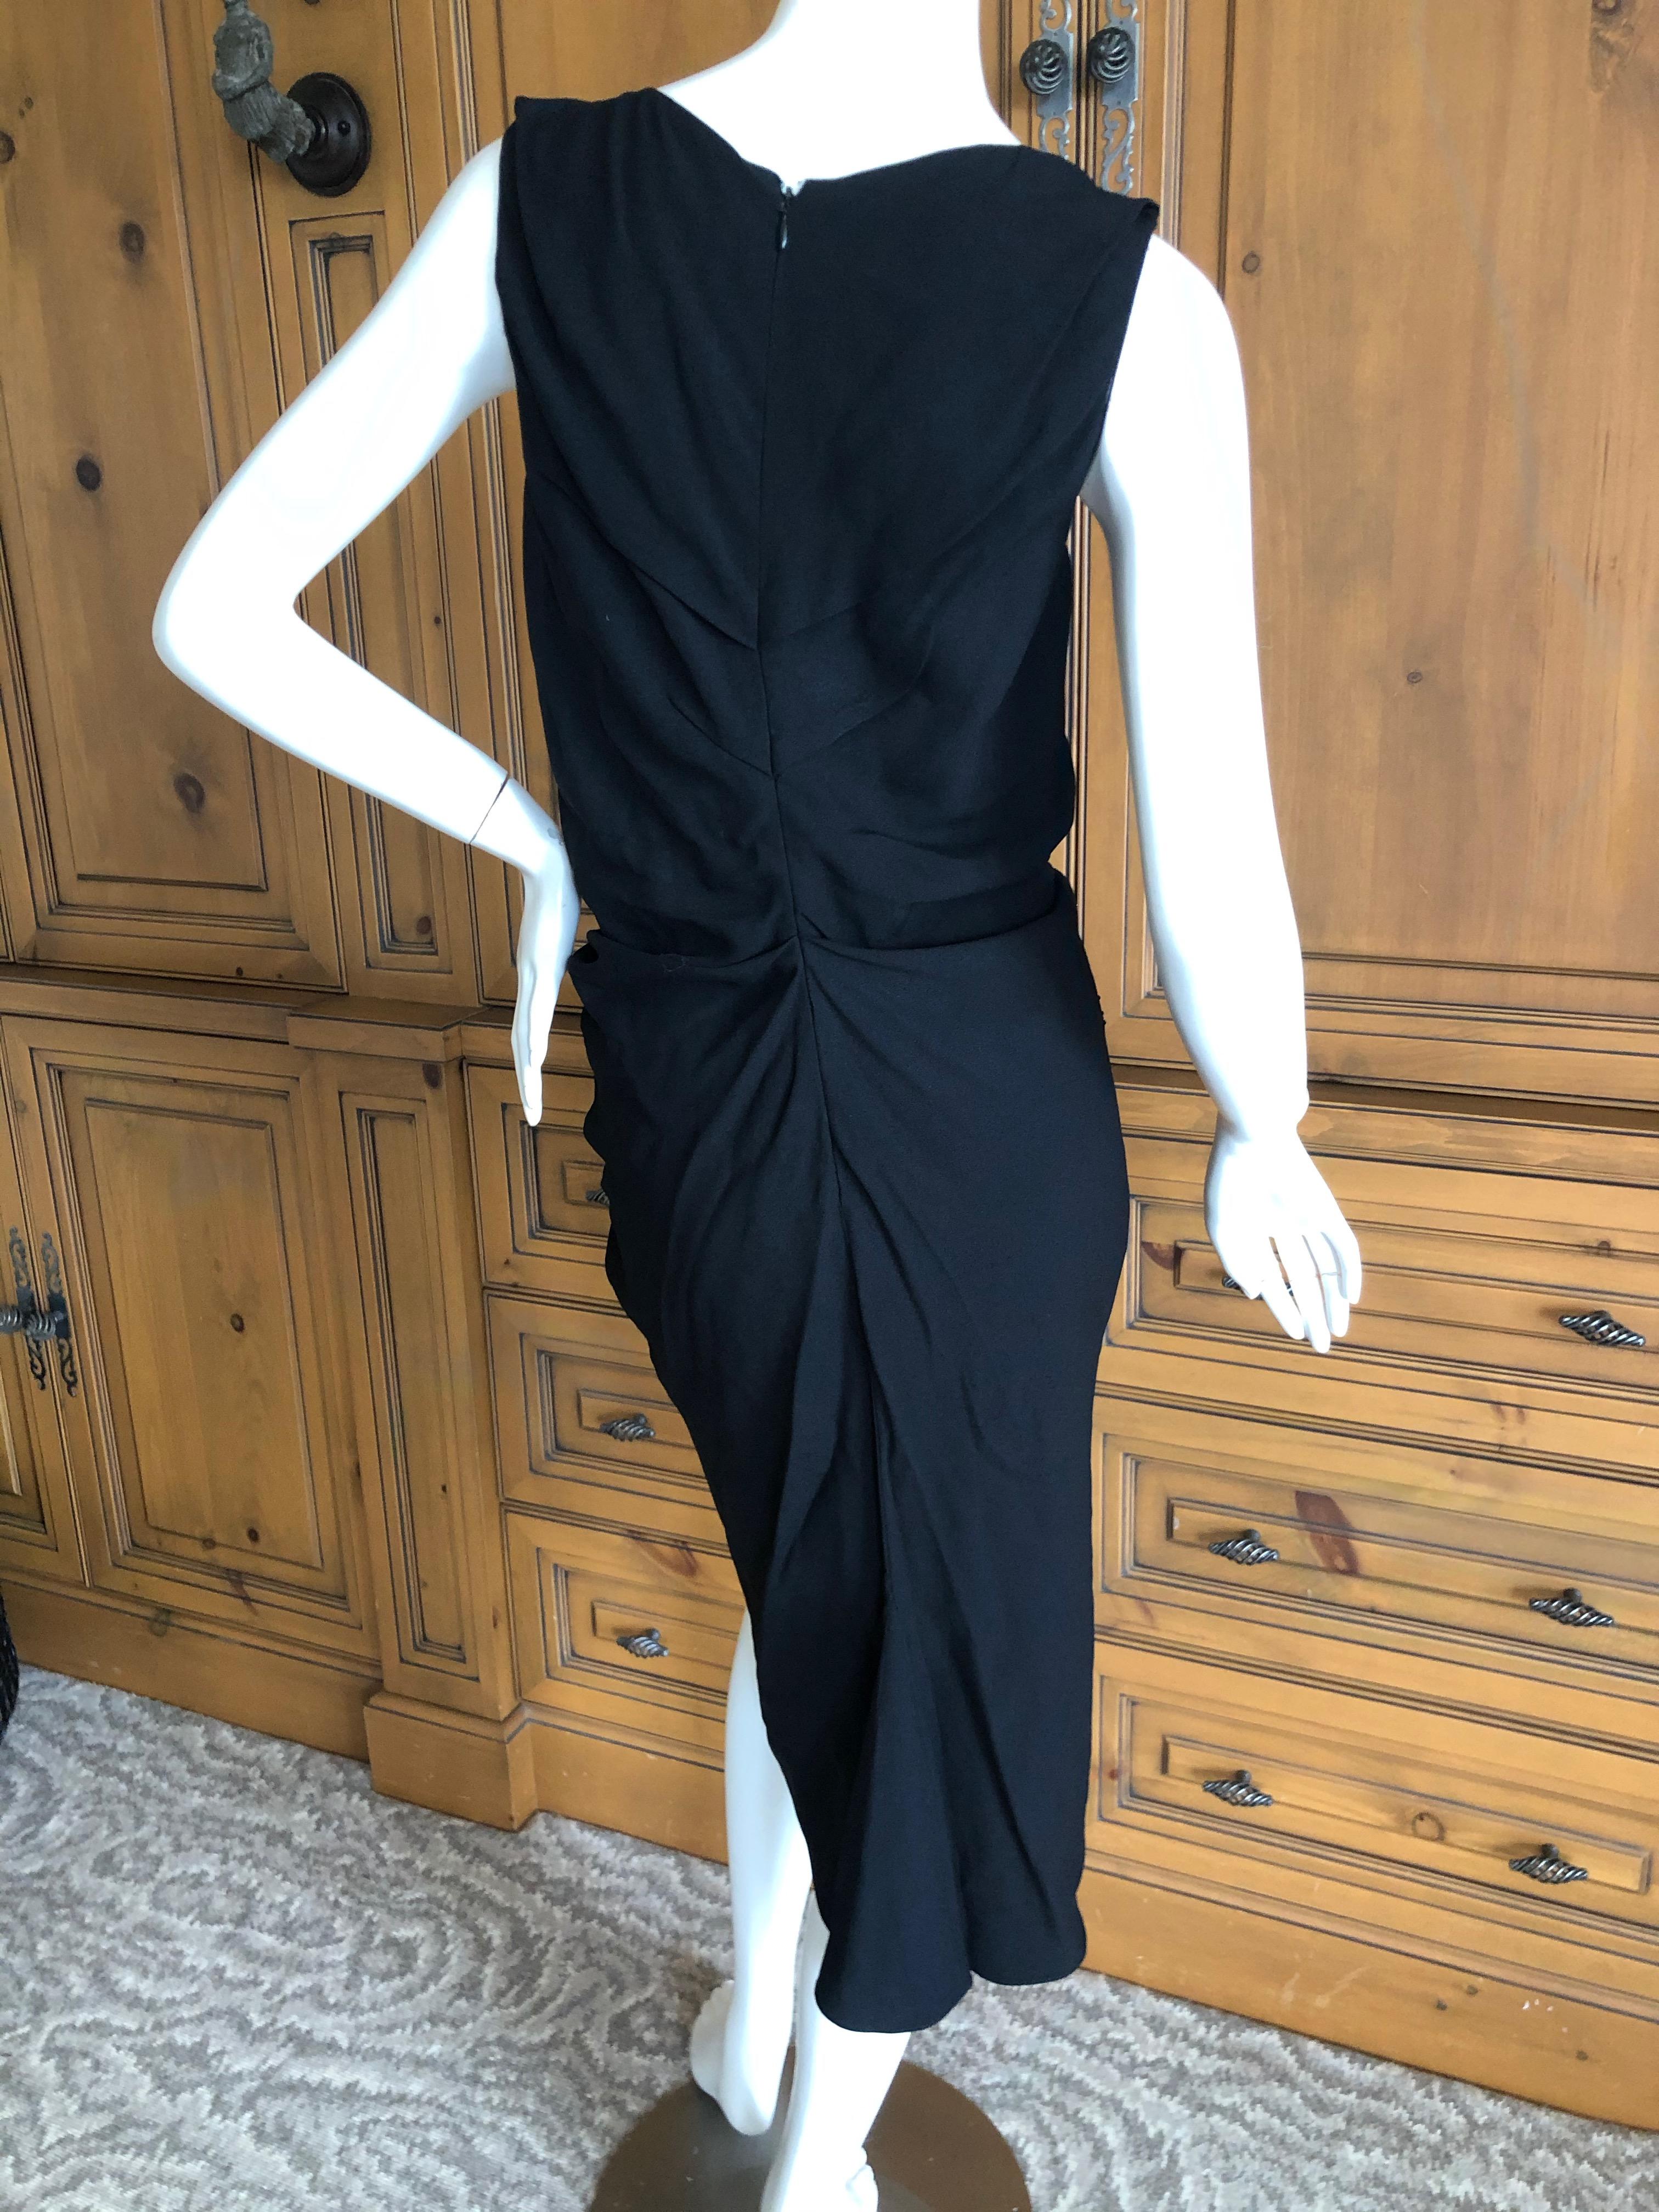 Christian Dior by John Galliano Black Jewel Embellished Cocktail Dress For Sale 5